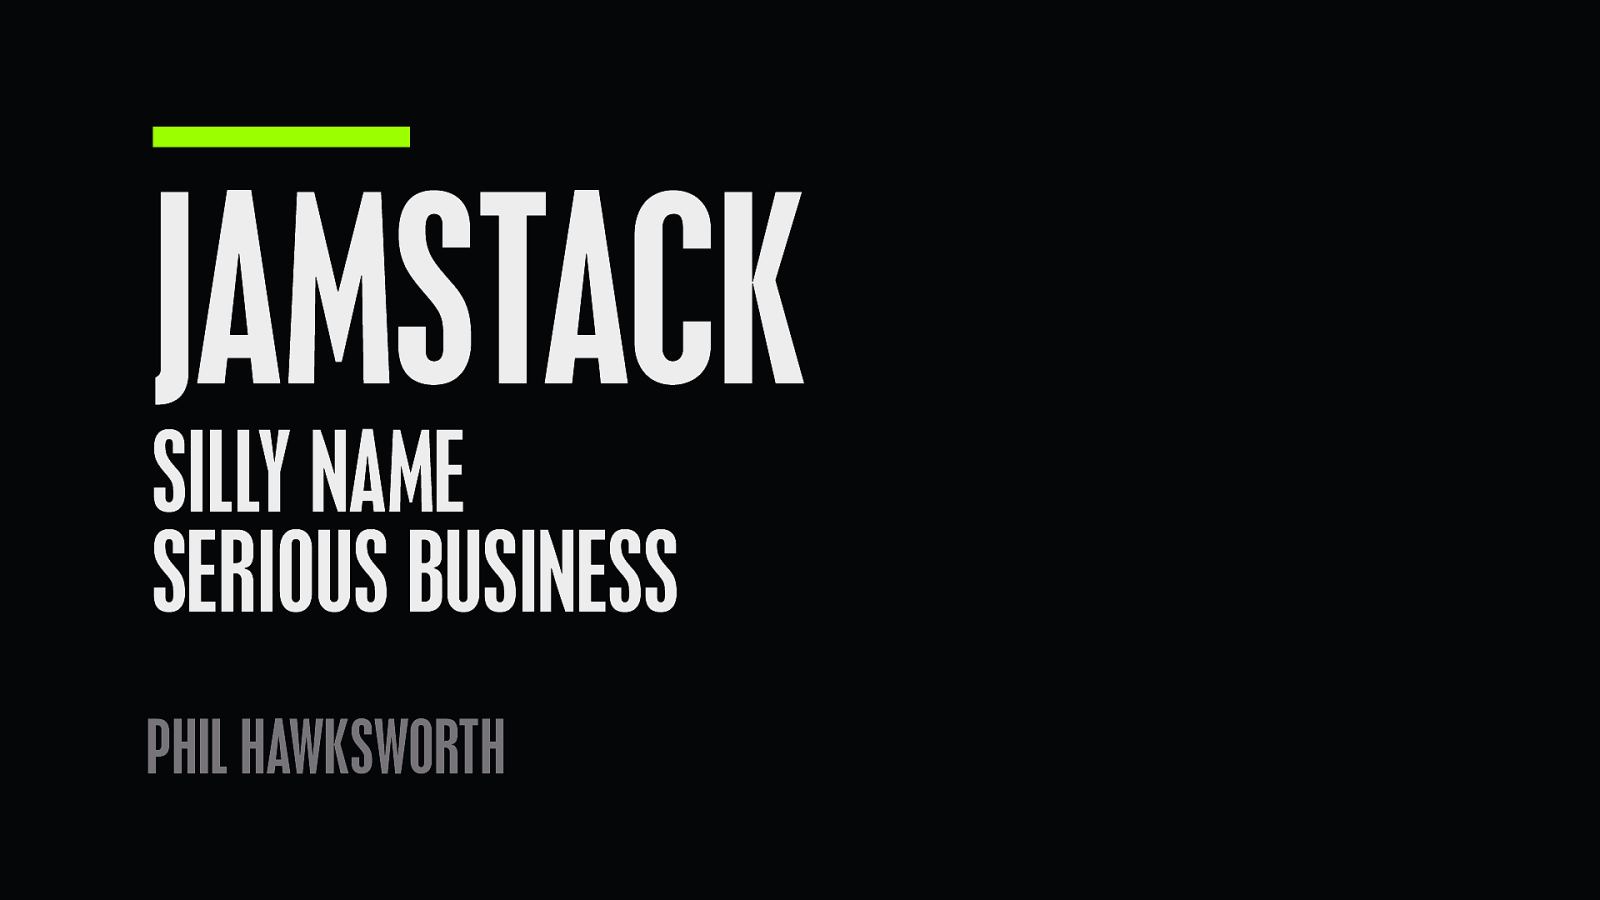 JAMstack: Silly name. Serious stuff.